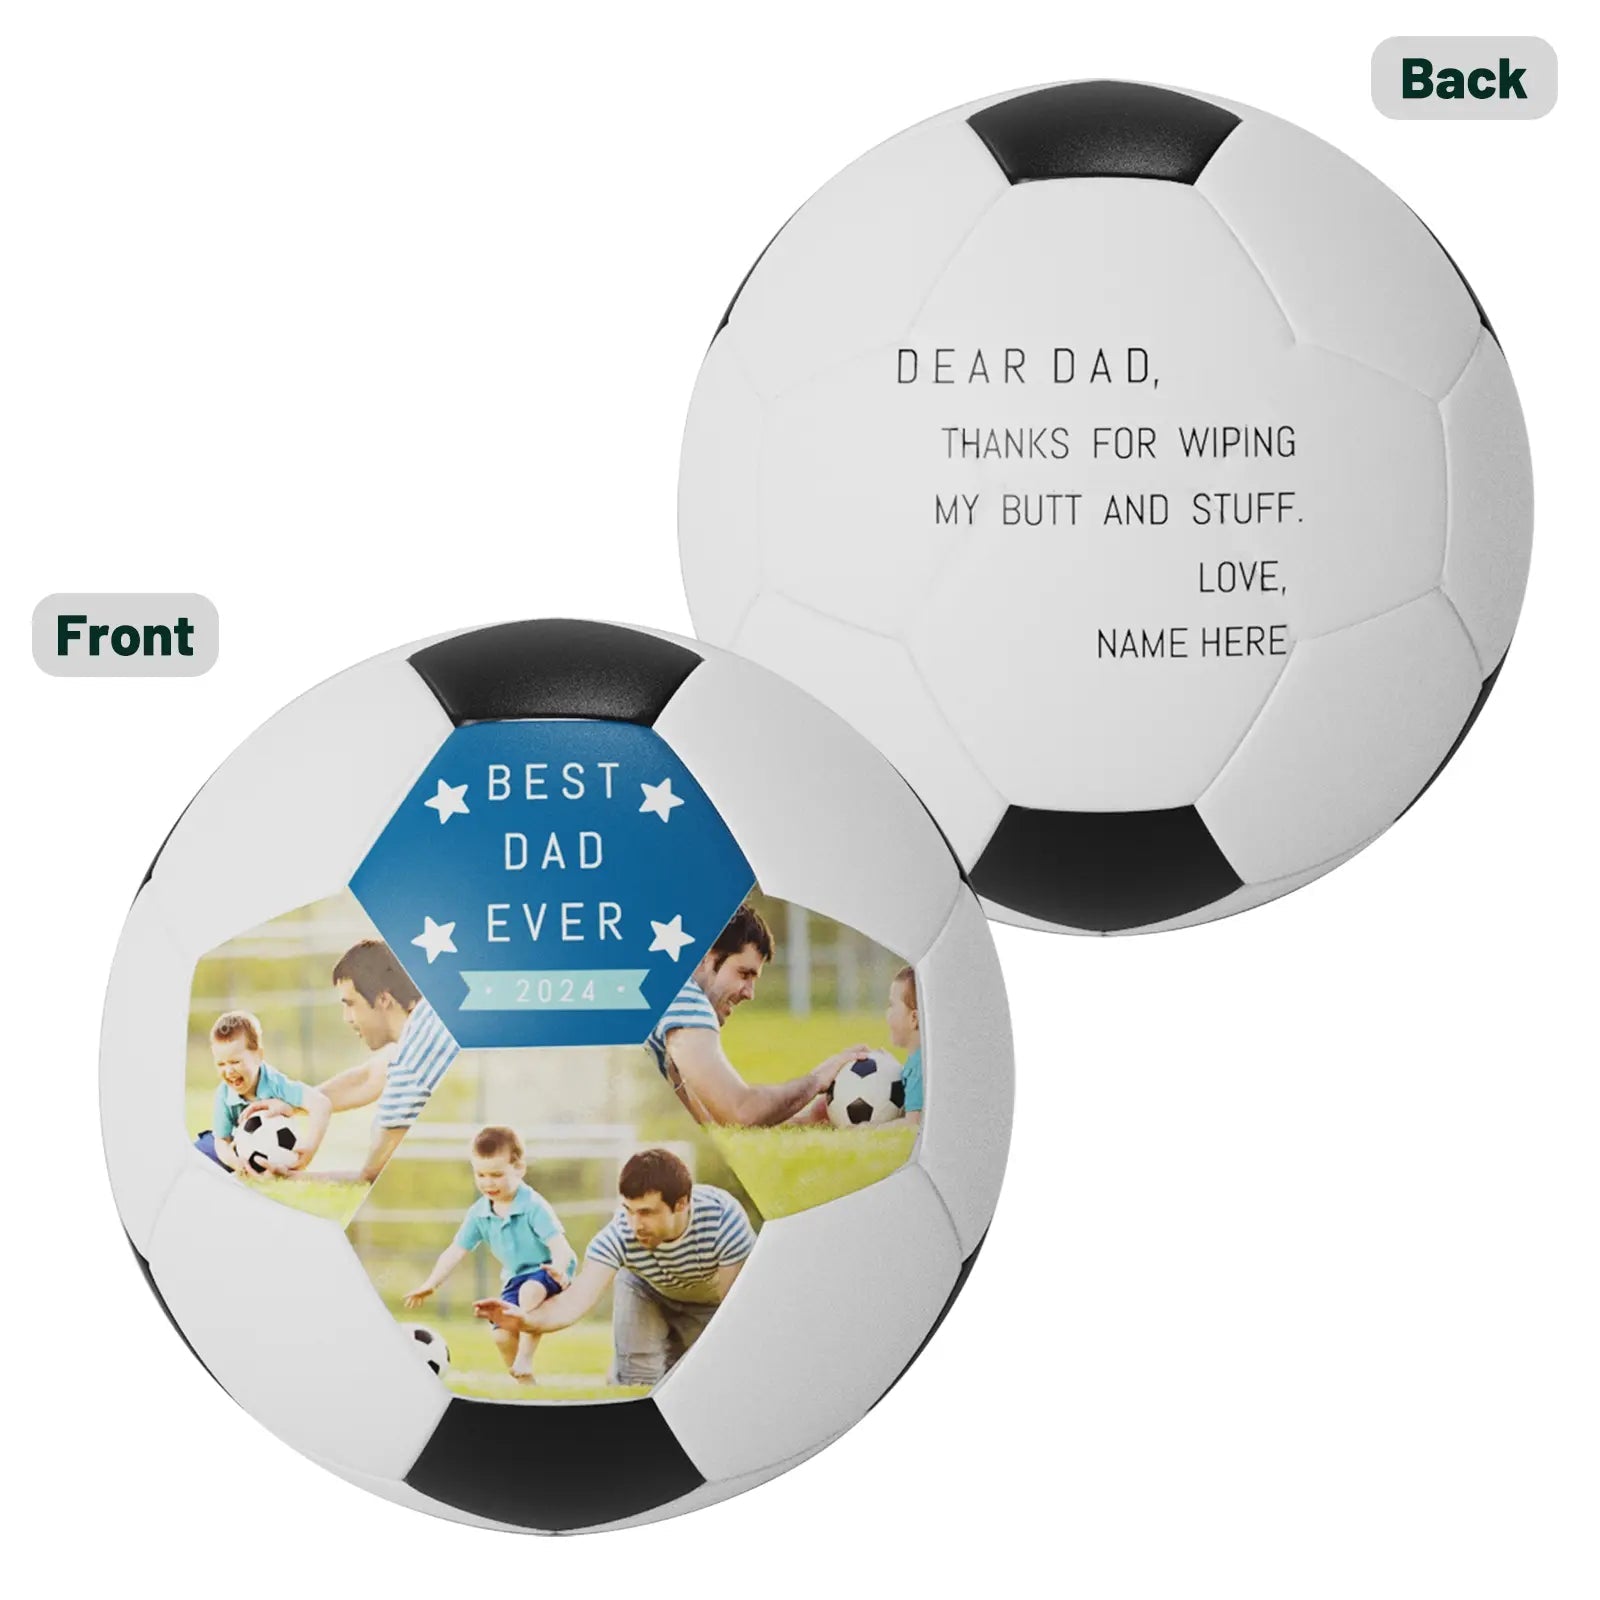 Best Dad Ever Custom Photo Soccer Ball - Family Watchs